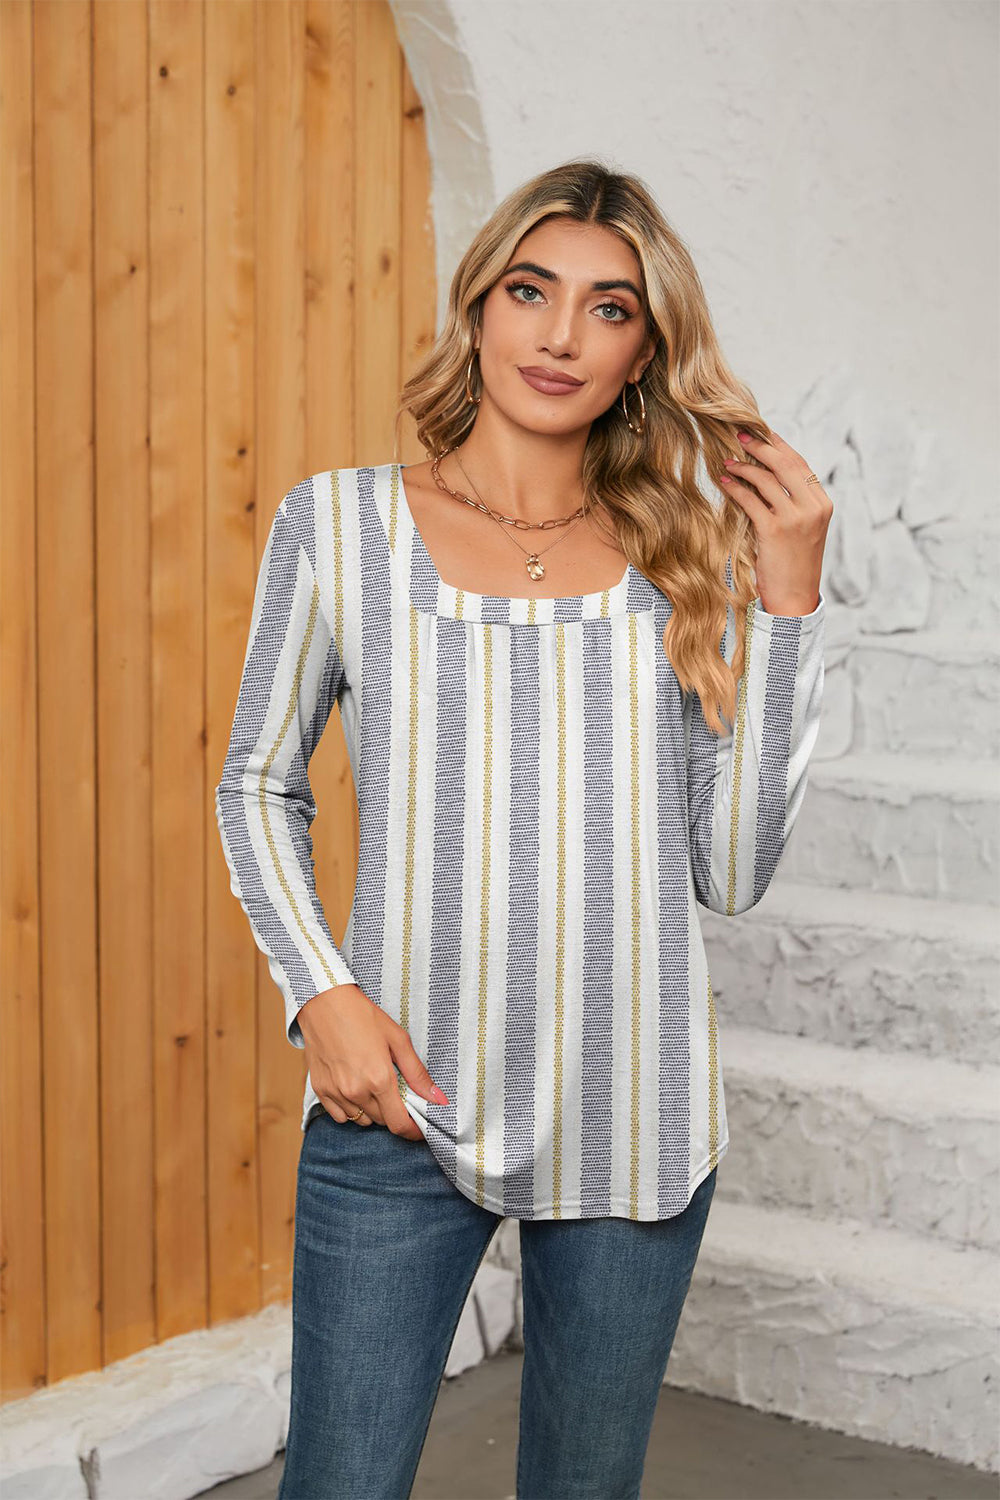 Printed Square Neck Long Sleeve Blouse - Stripe / S - Women’s Clothing & Accessories - Shirts & Tops - 16 - 2024